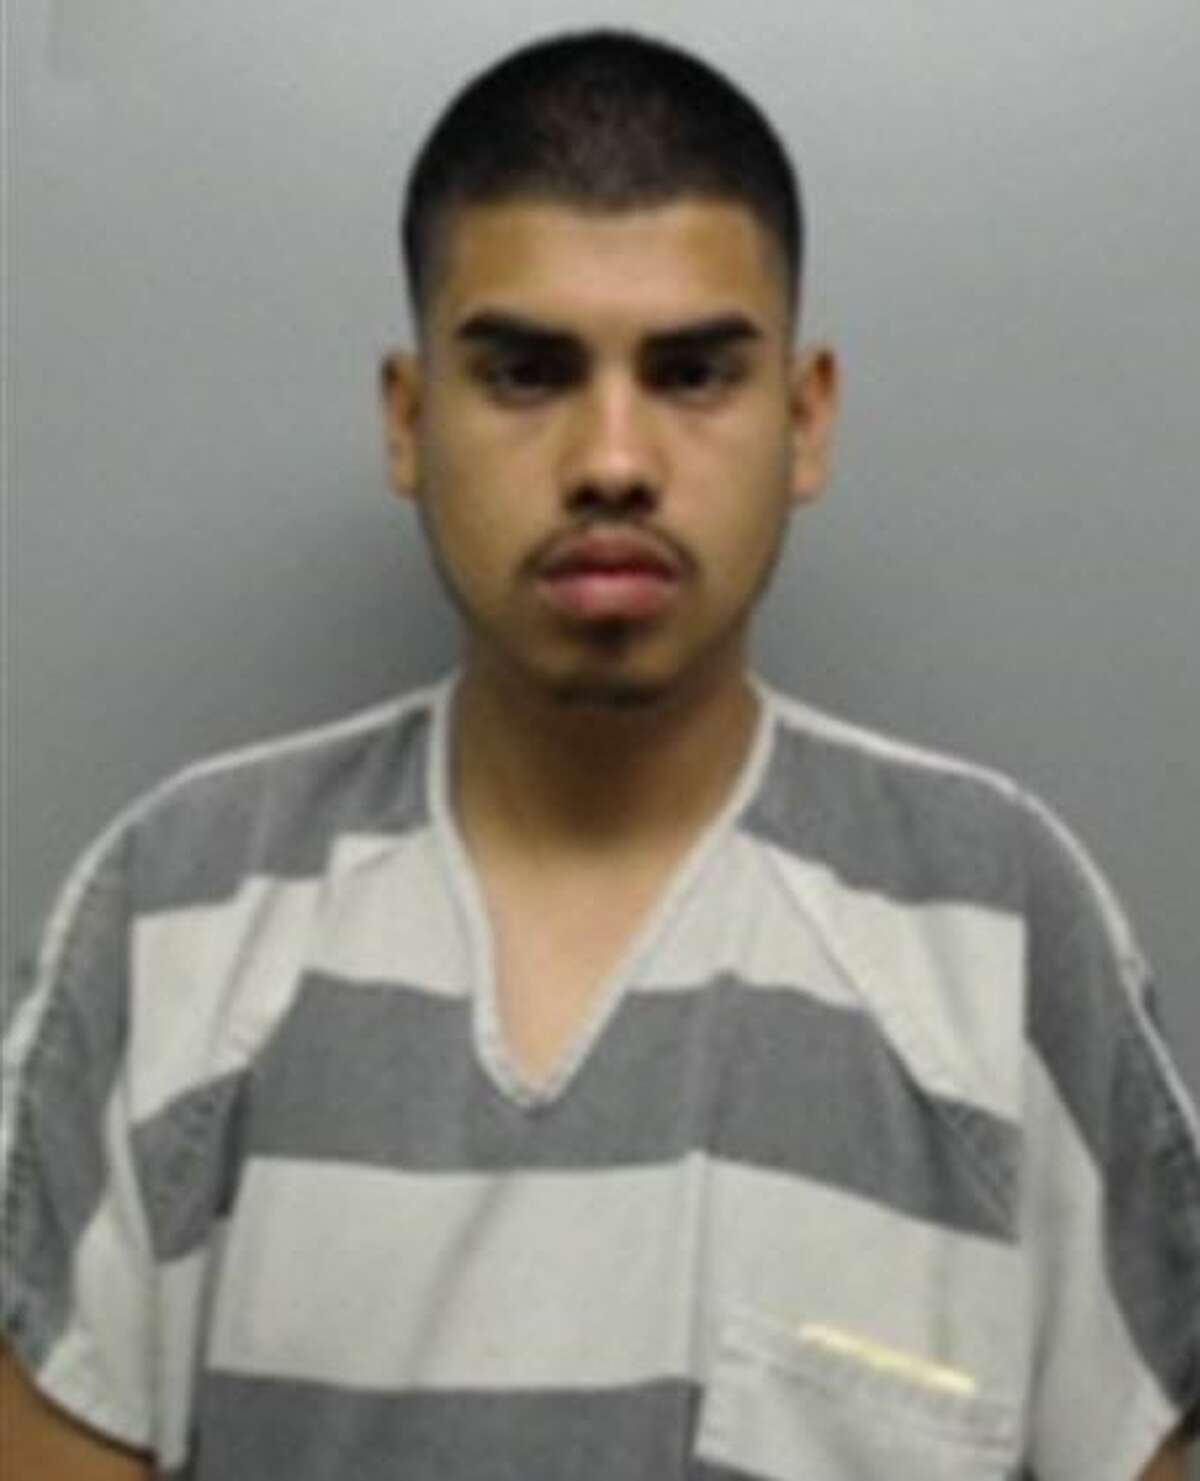 Sixto Lozano, 18, was arrested and charged with aggravated assault with a deadly weapon.